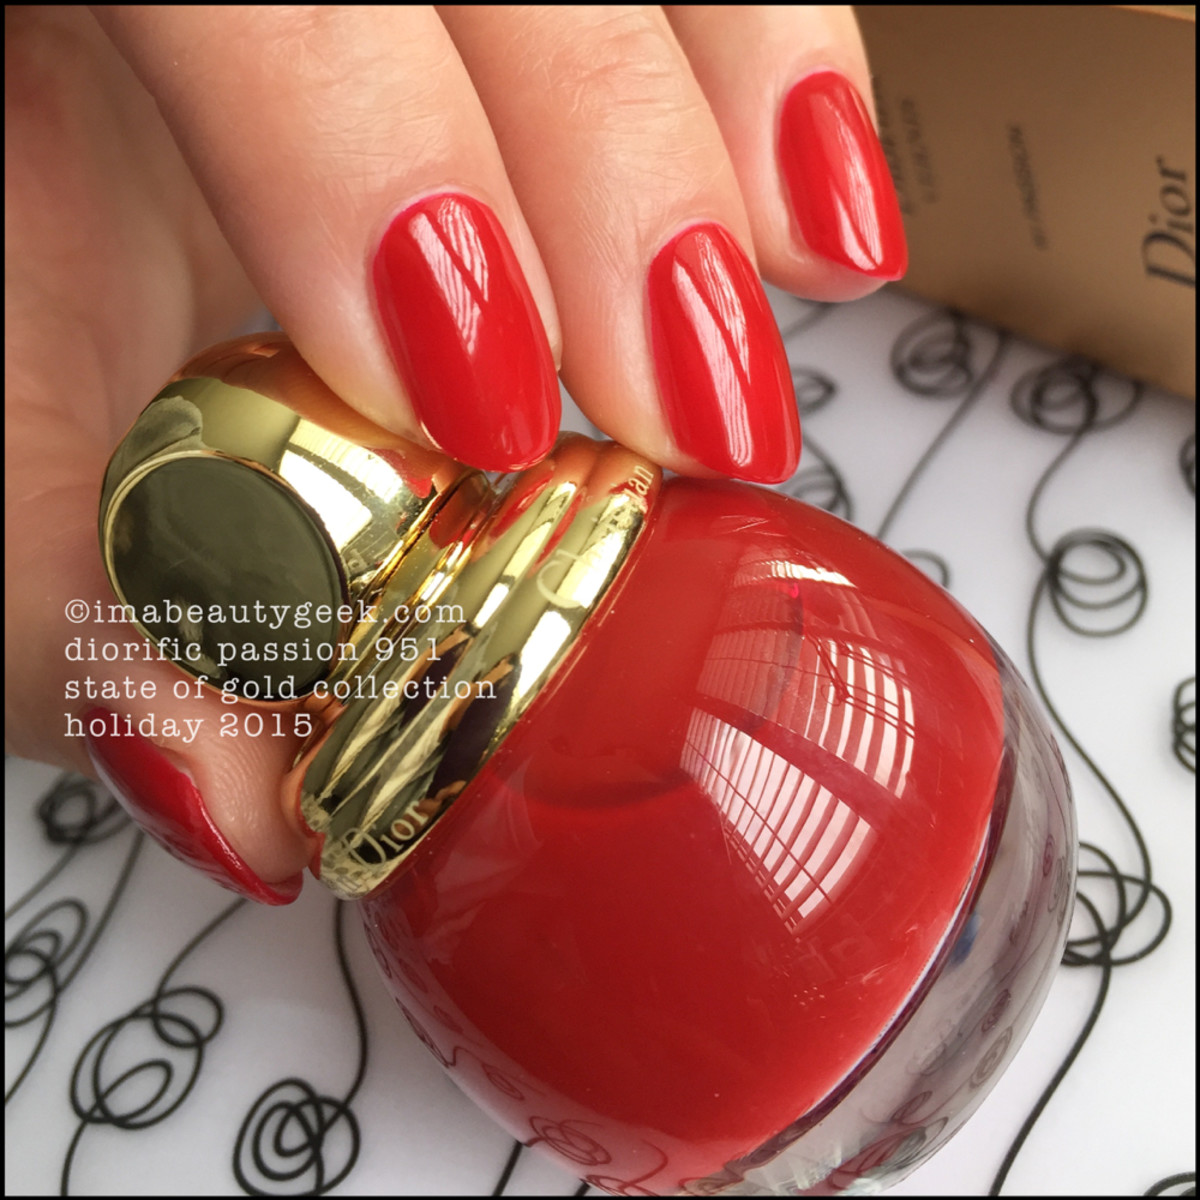 Dior State of Gold Collection Holiday 2015_Diorific Passion 951 Vernis